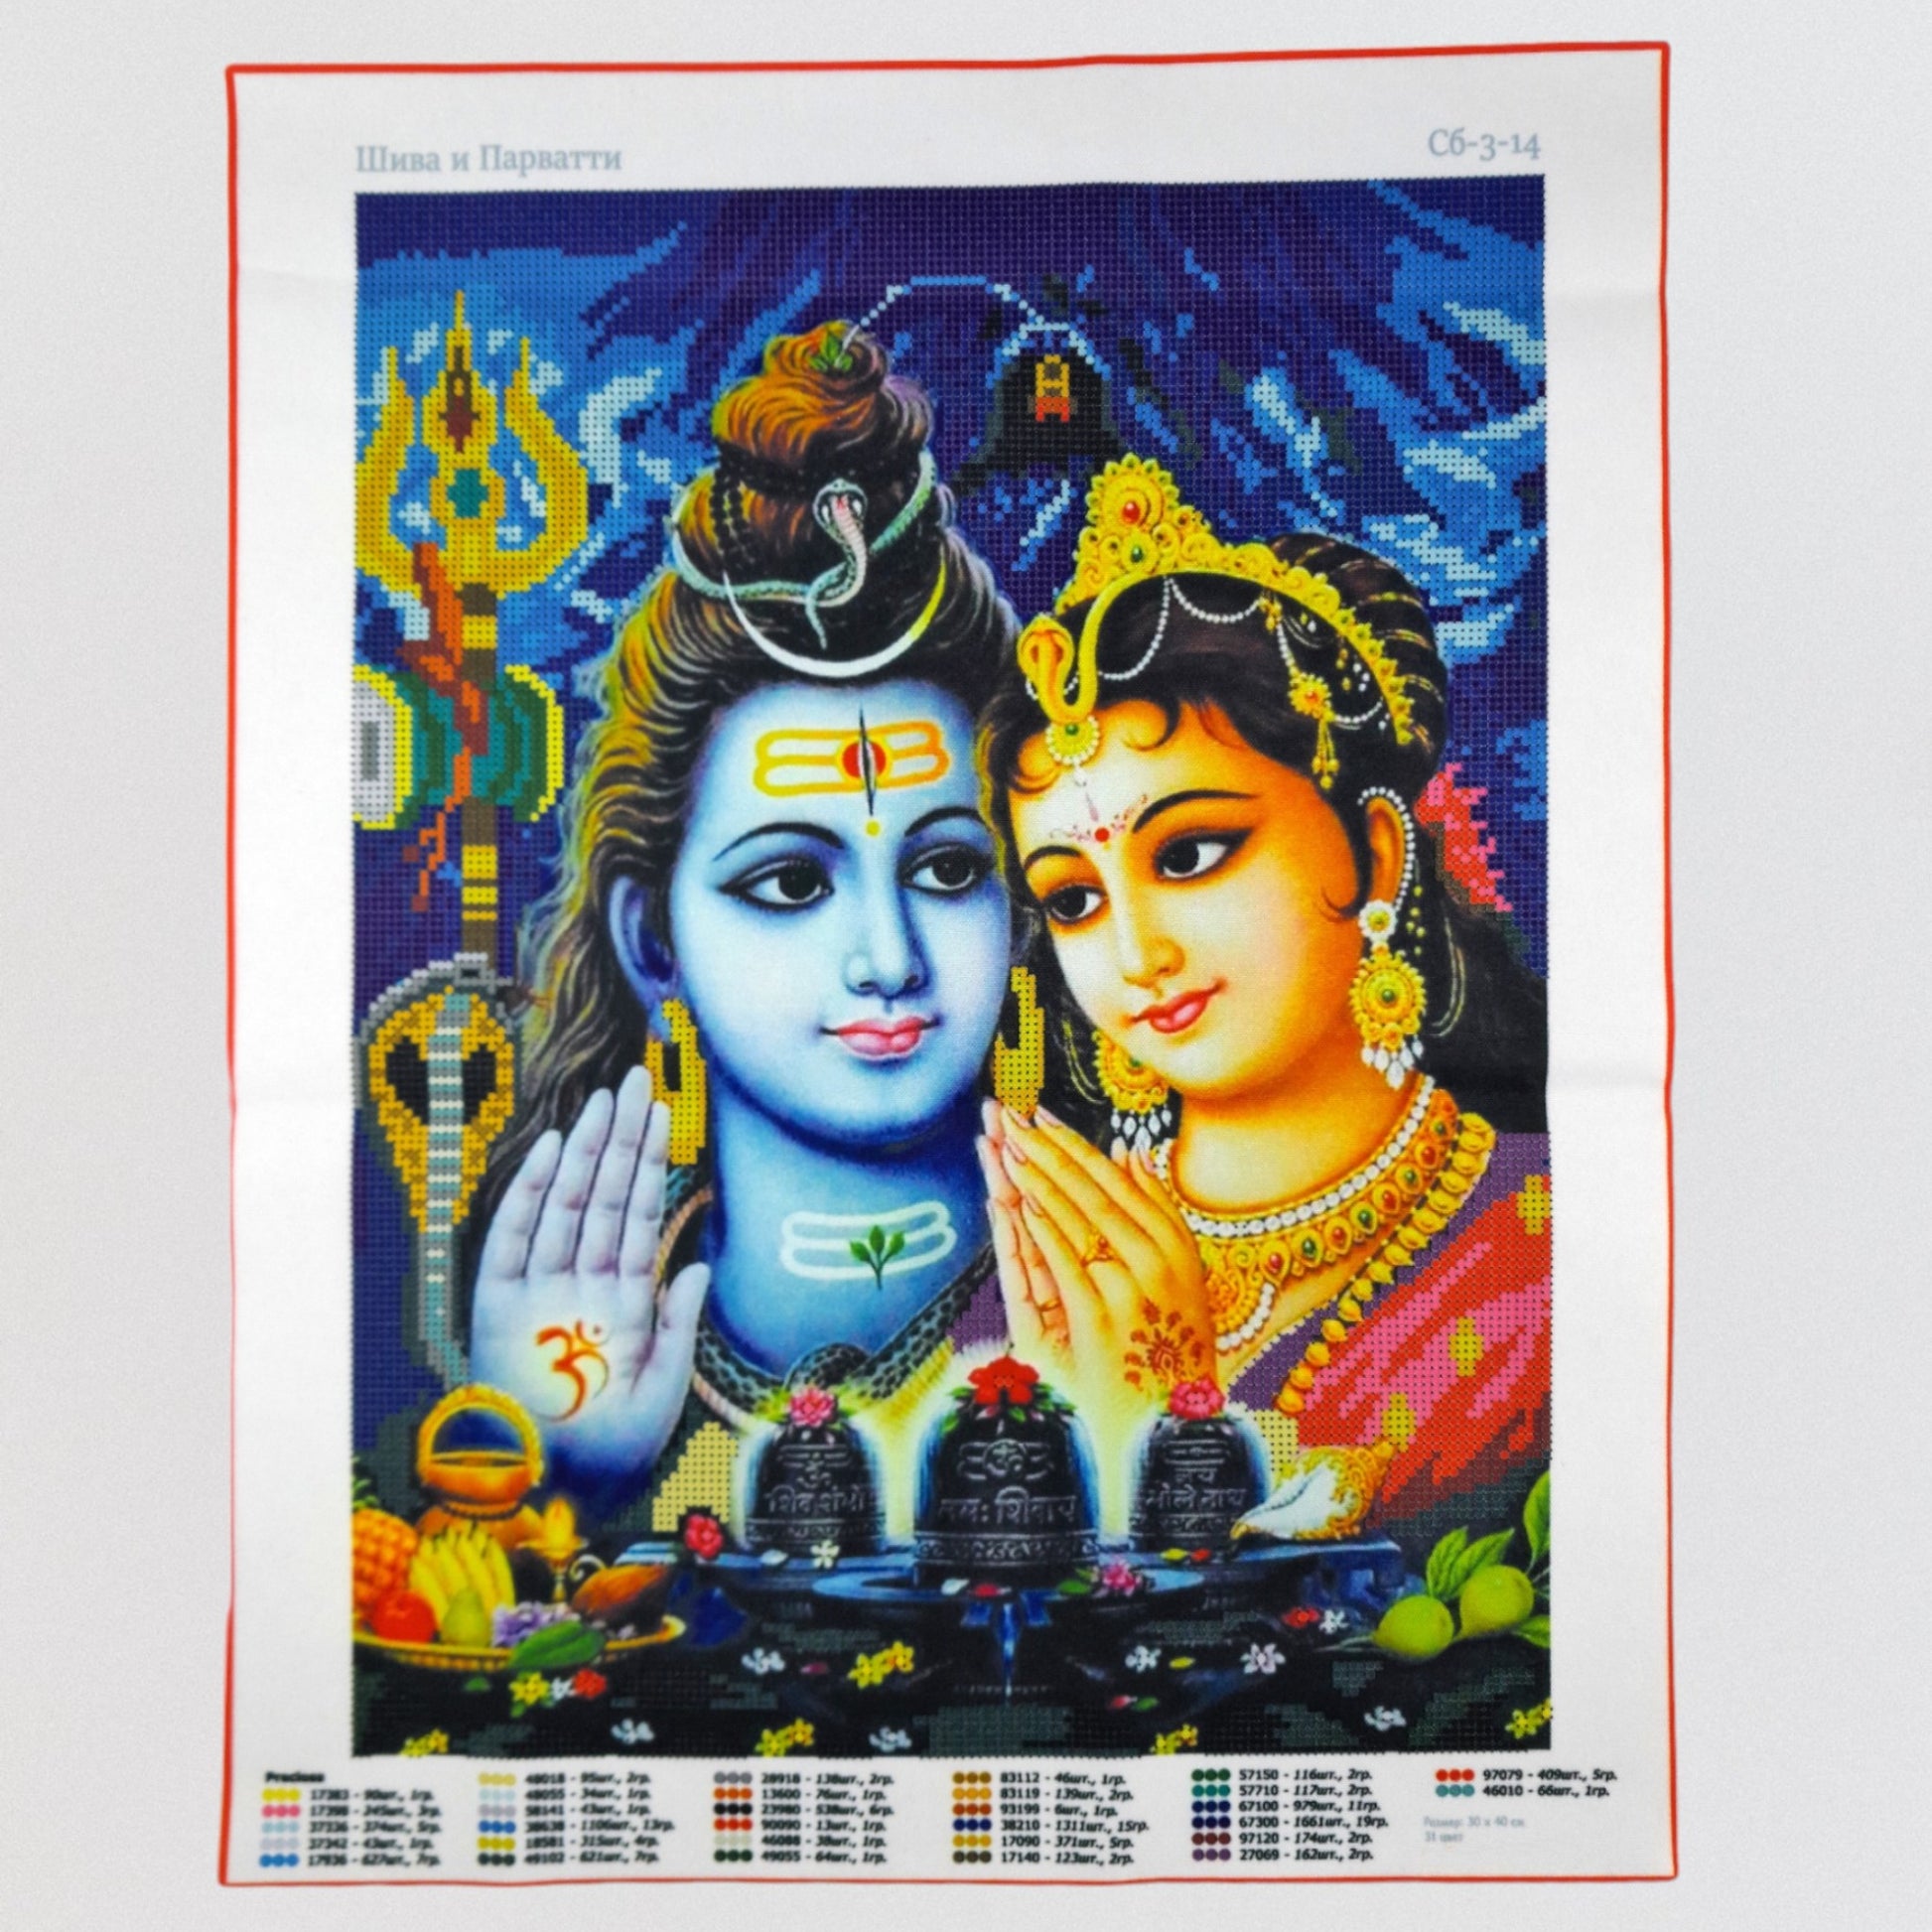 Bead embroidery kit "Shiva and Parvatti". Size: 11.8 - 15.8 in (30 - 40 cm) - VadymShop